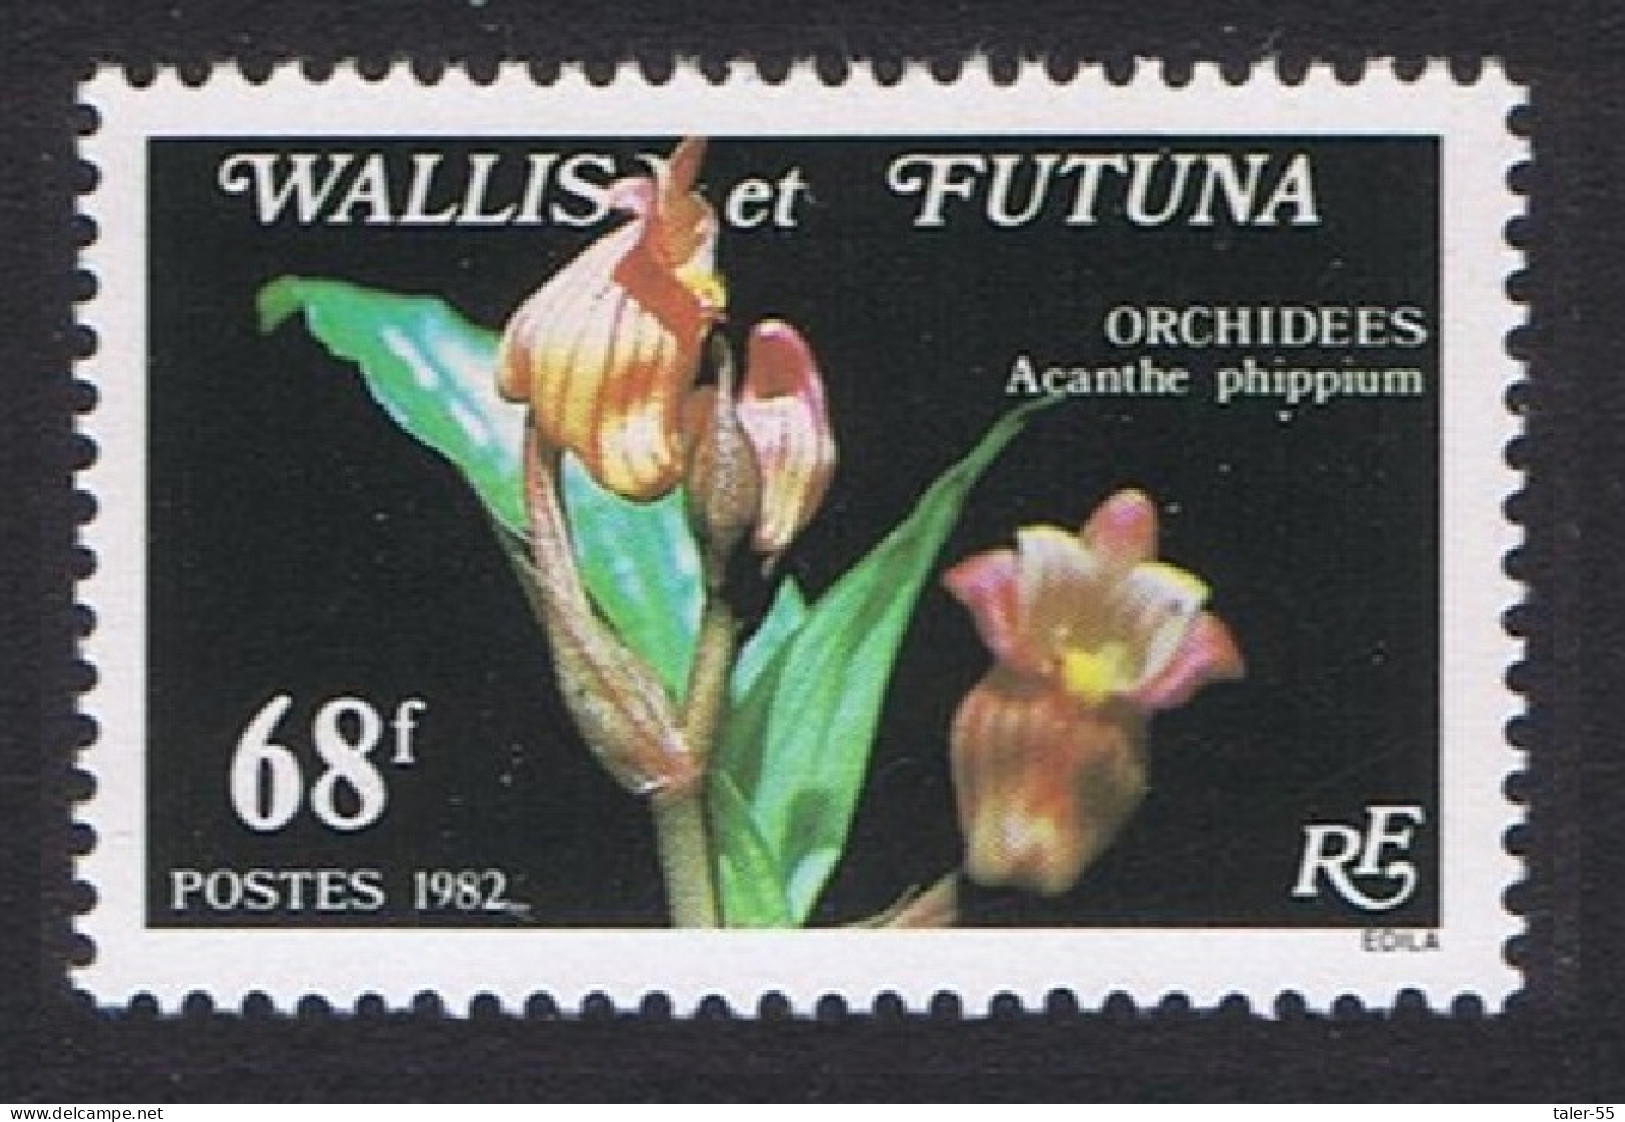 Wallis And Futuna Orchids Acanthe Phippium 68f 1982 MNH SG#397 Sc#284 - Unused Stamps